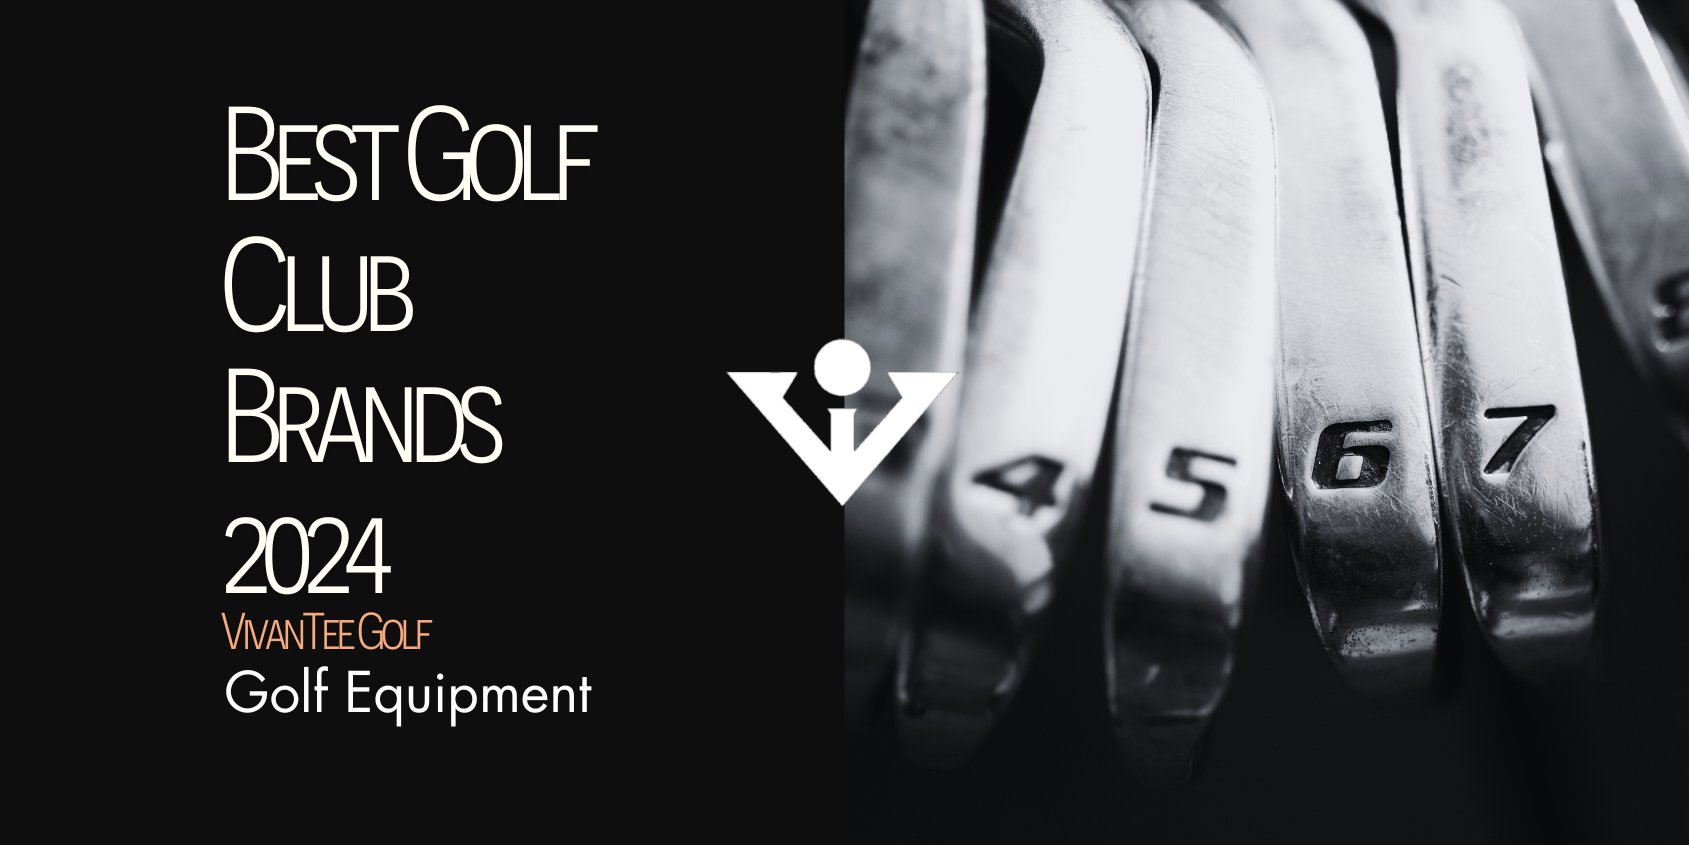 Showing various irons from 4-8 lined up, in our signature blog banner for best golf club brands in 2024